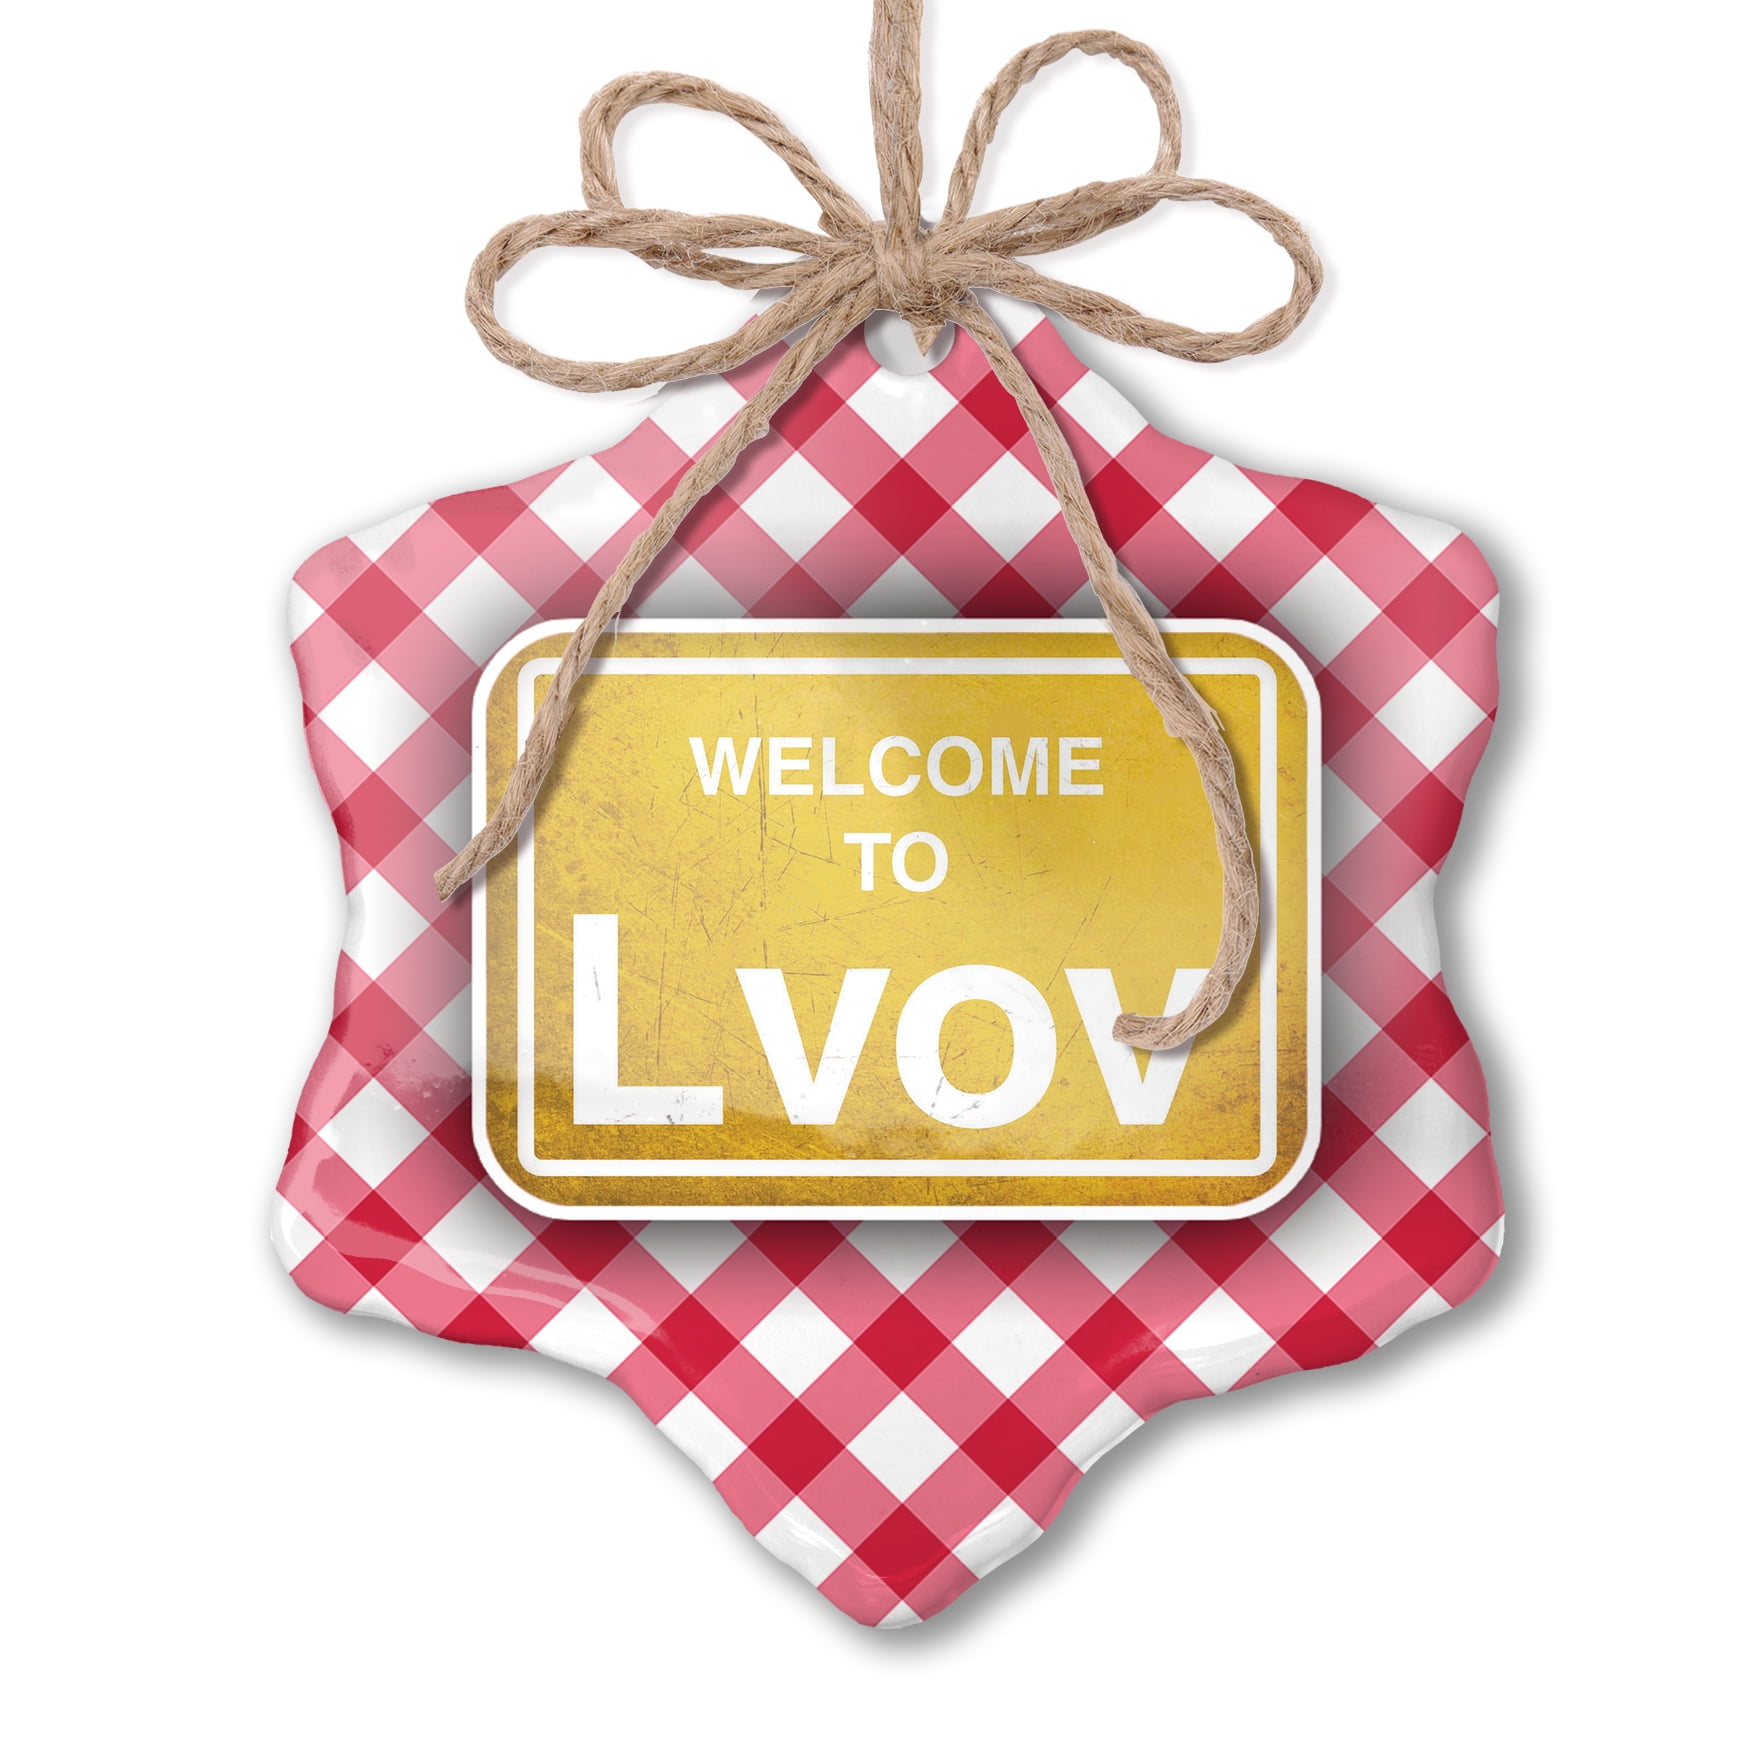 Welcome to the Lvov Site